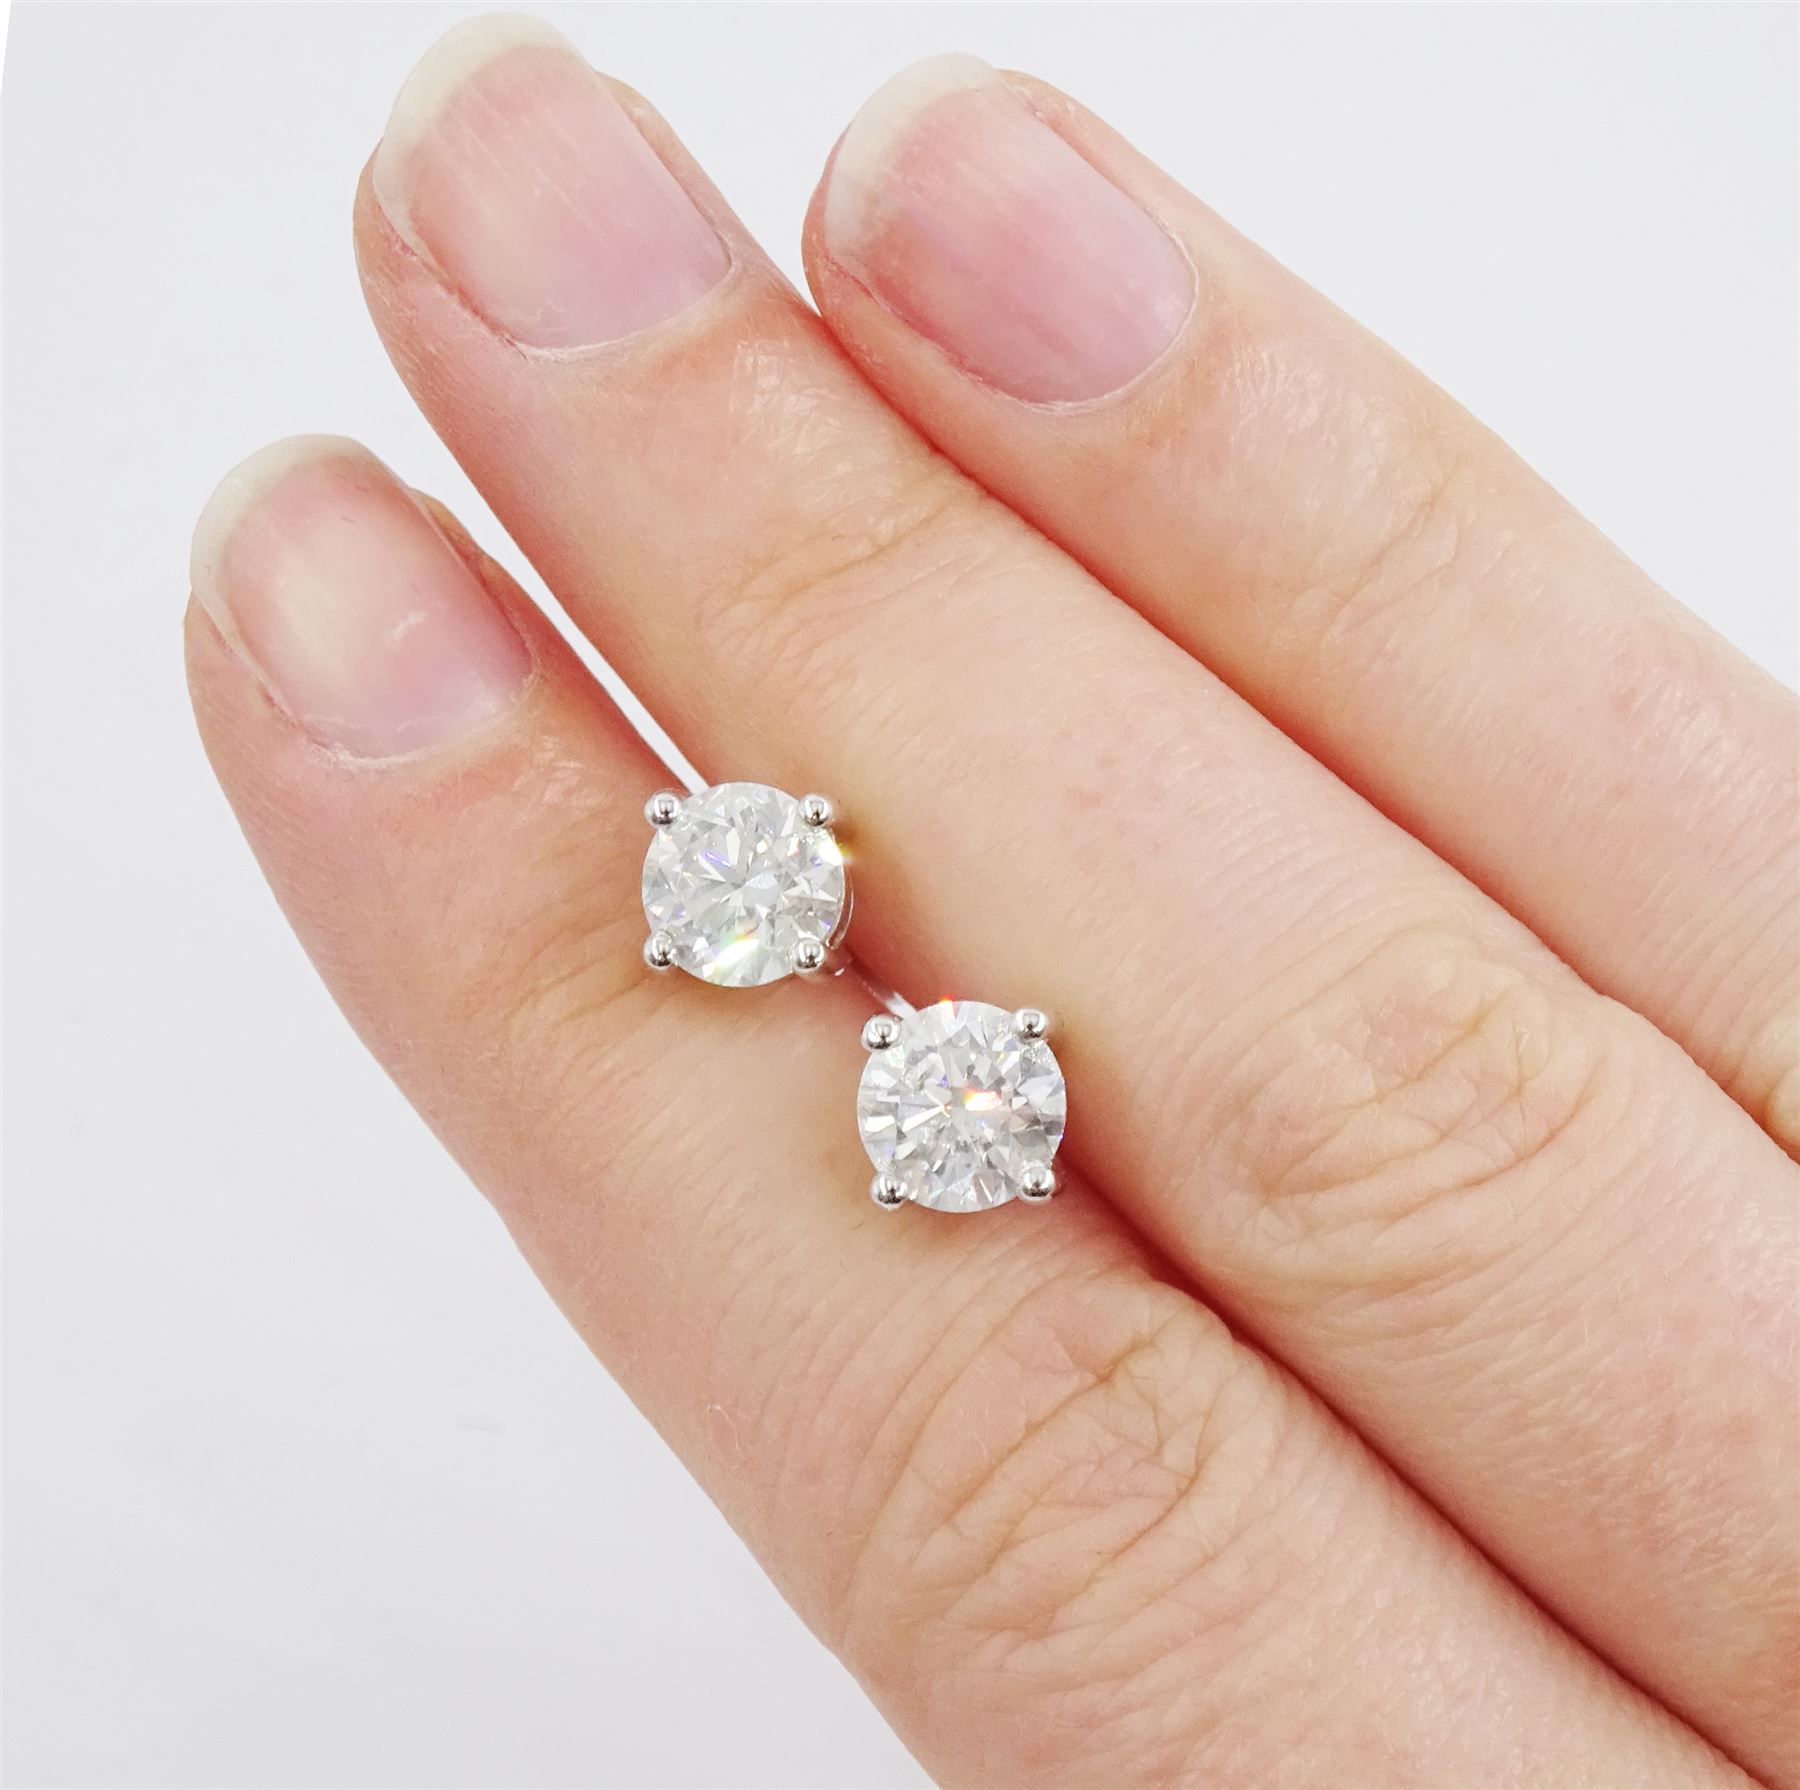 Pair of 18ct white gold round brilliant cut diamond stud earrings - Image 2 of 4